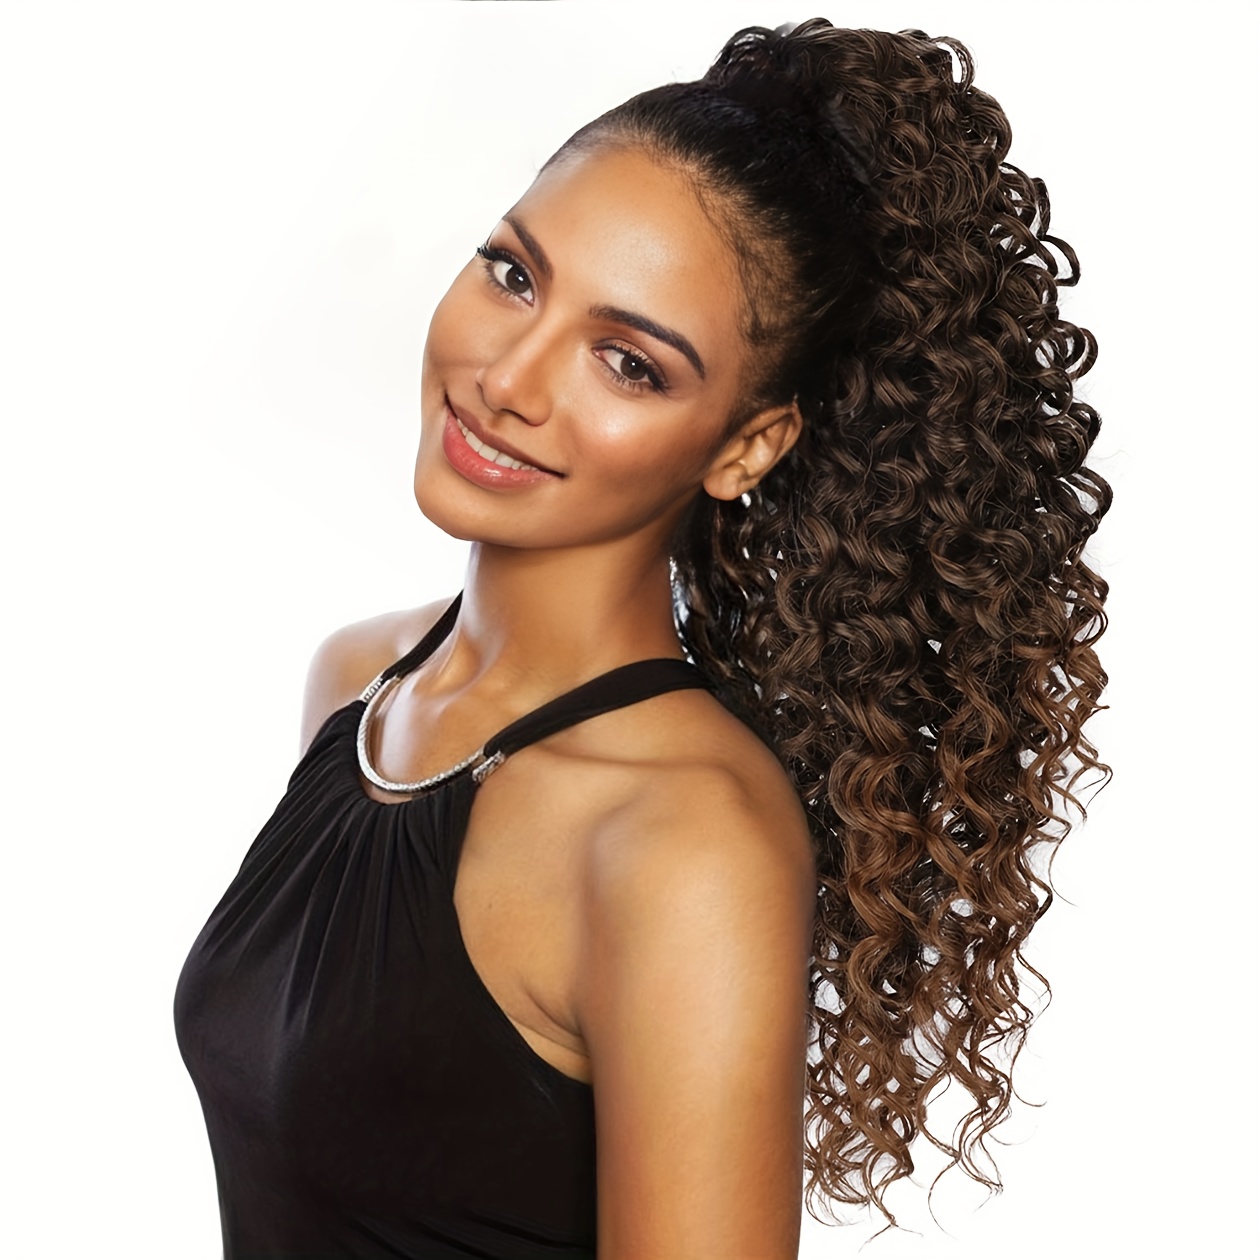 

18 Inch Ponytail Extensions Drawstring Long Curly Soft Clip In Hair Extension Synthetic Heat Resistant Hairpiece For Women Hair Accessories